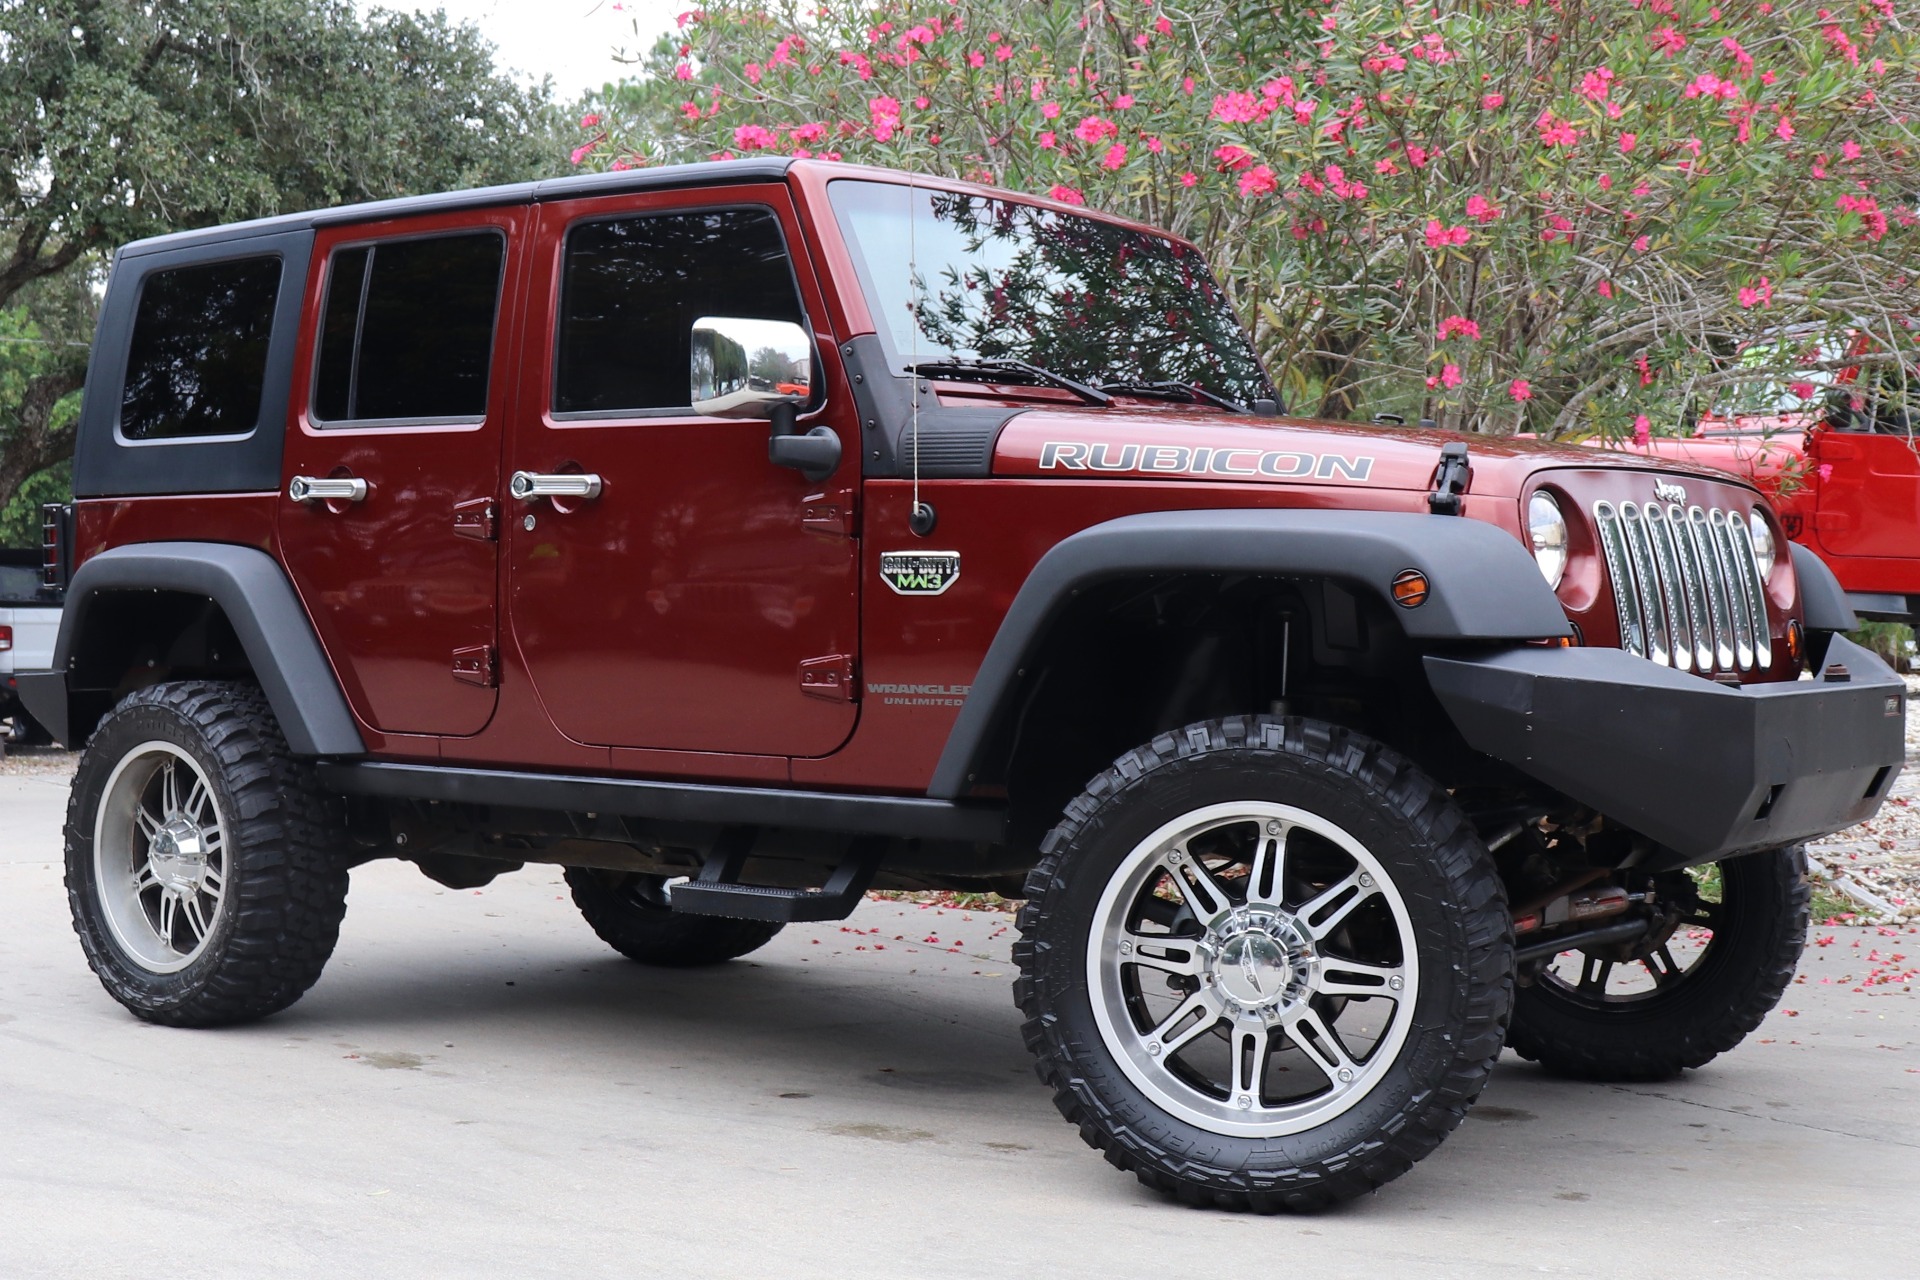 Used 2008 Jeep Wrangler Unlimited Rubicon For Sale ($18,995) | Select ...